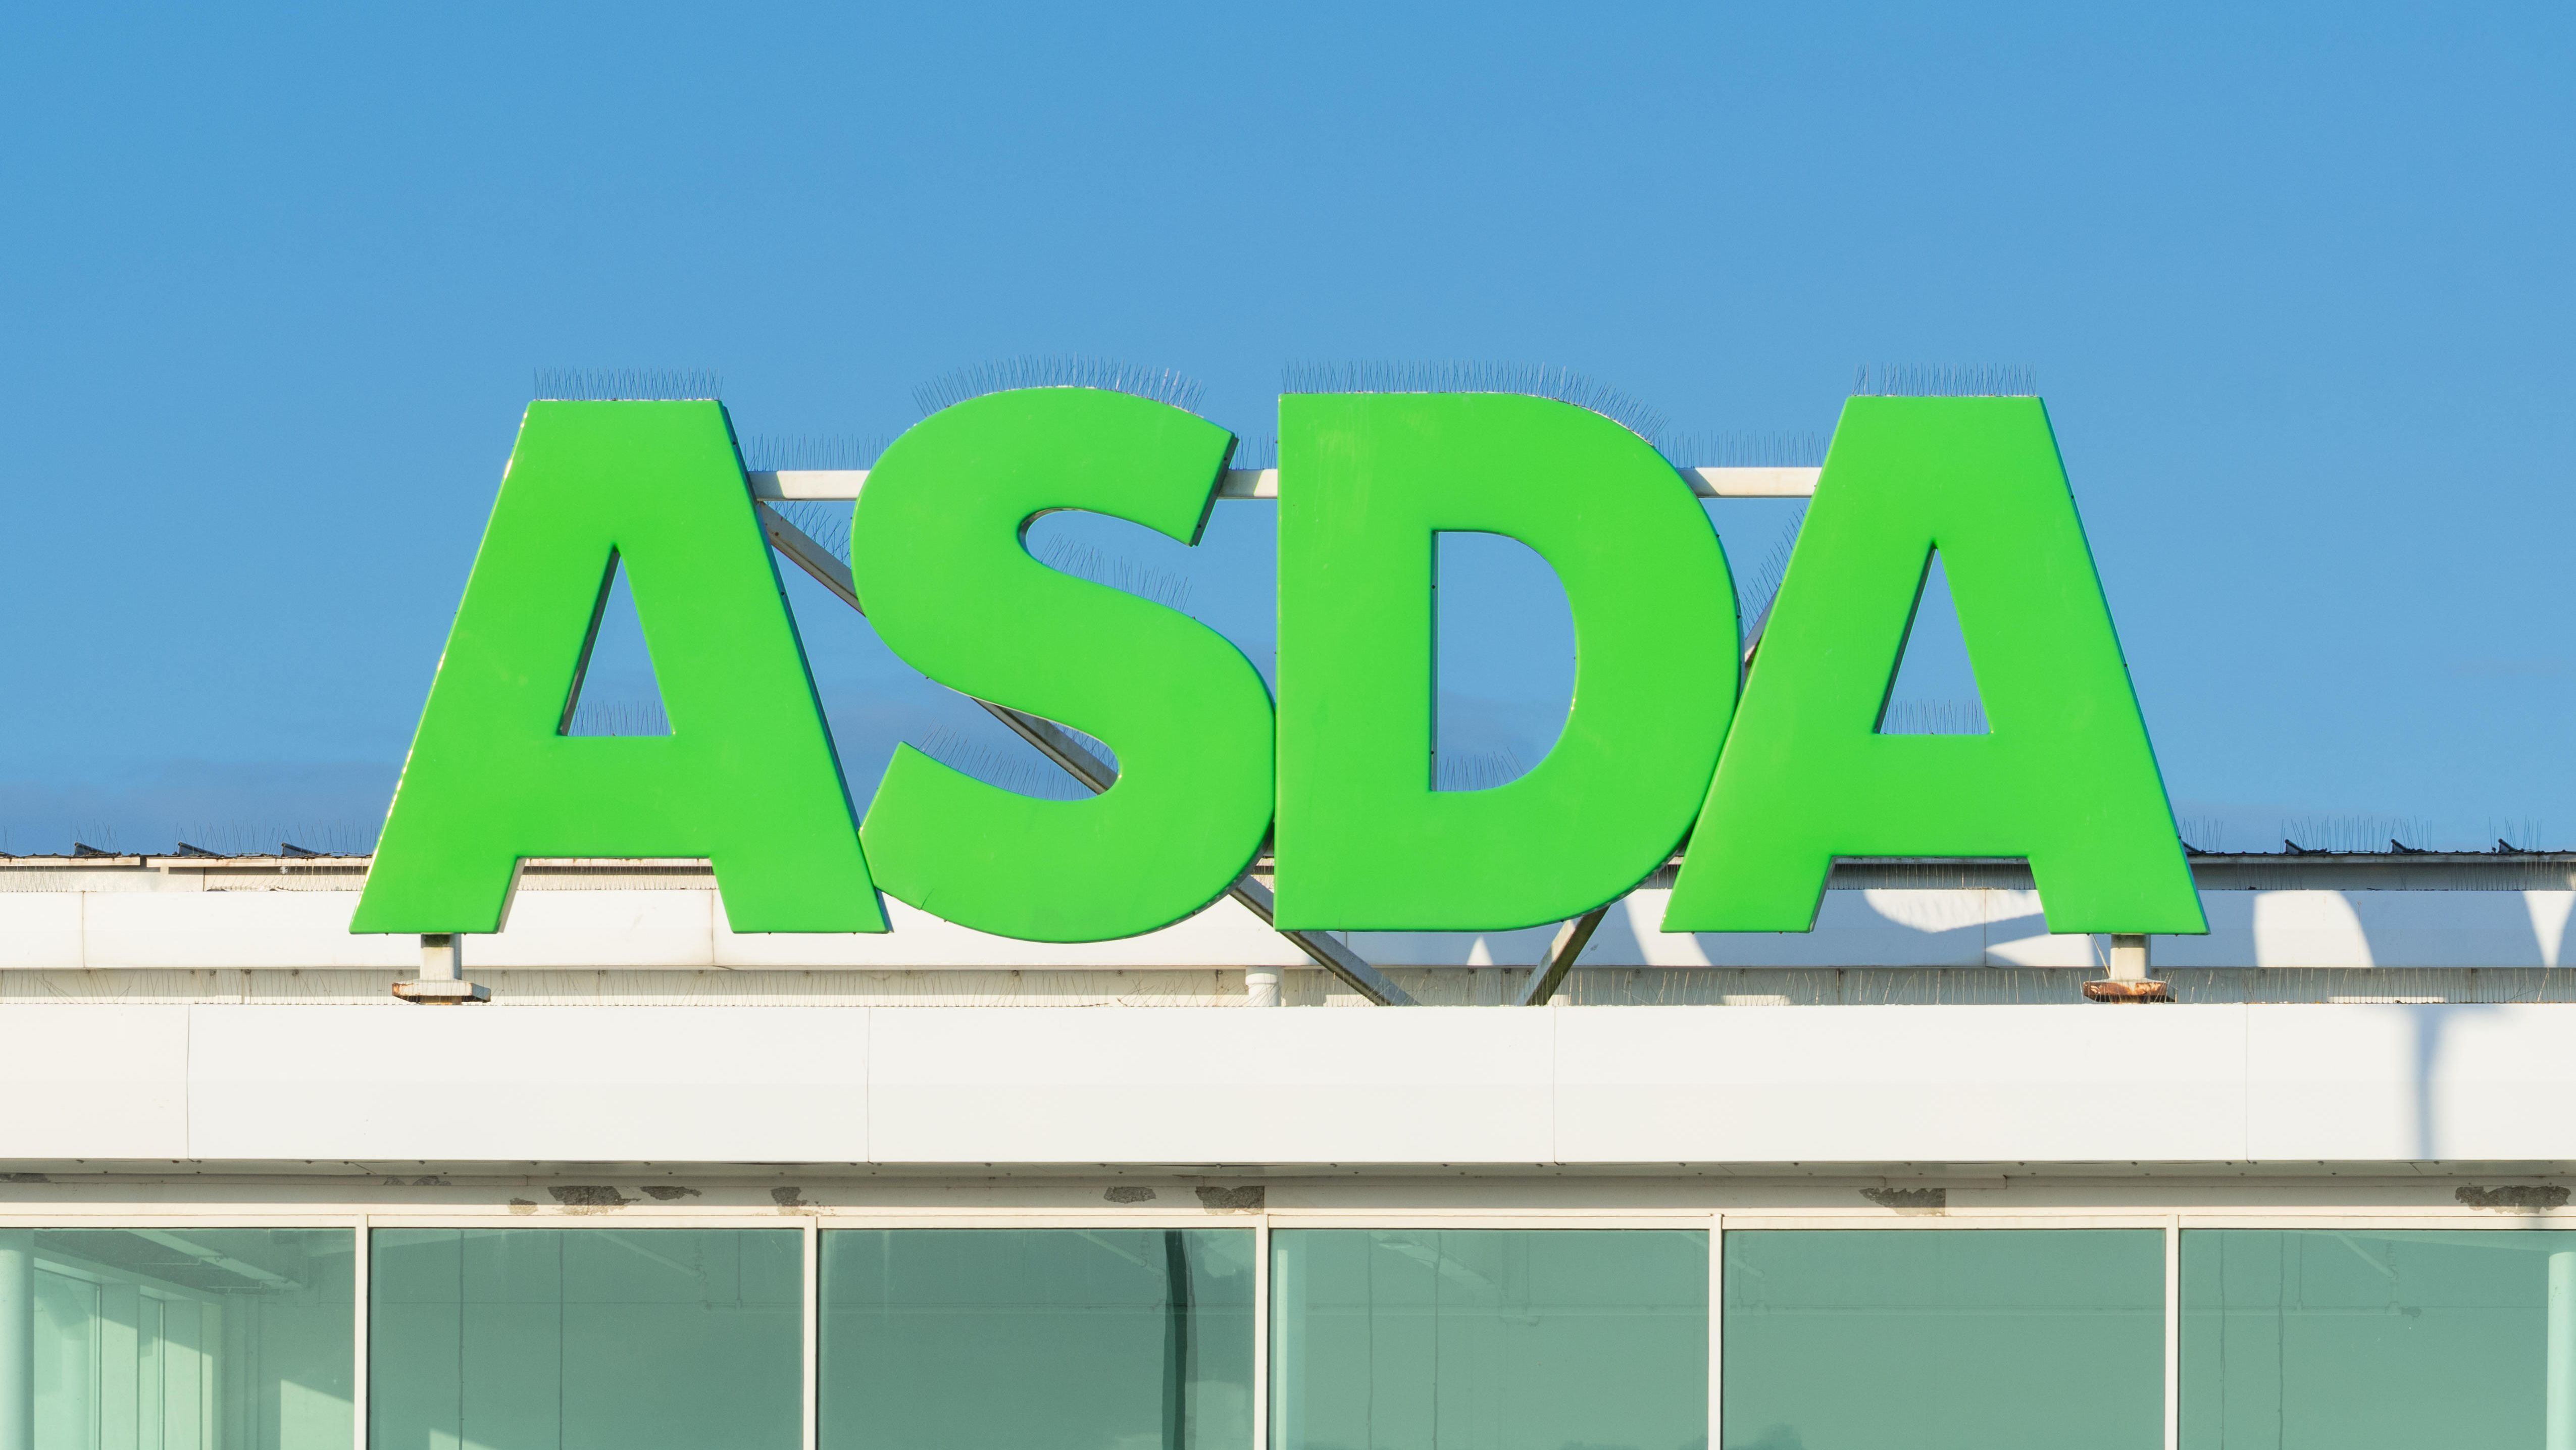 Have your say on revamped Asda plans for Salisbury